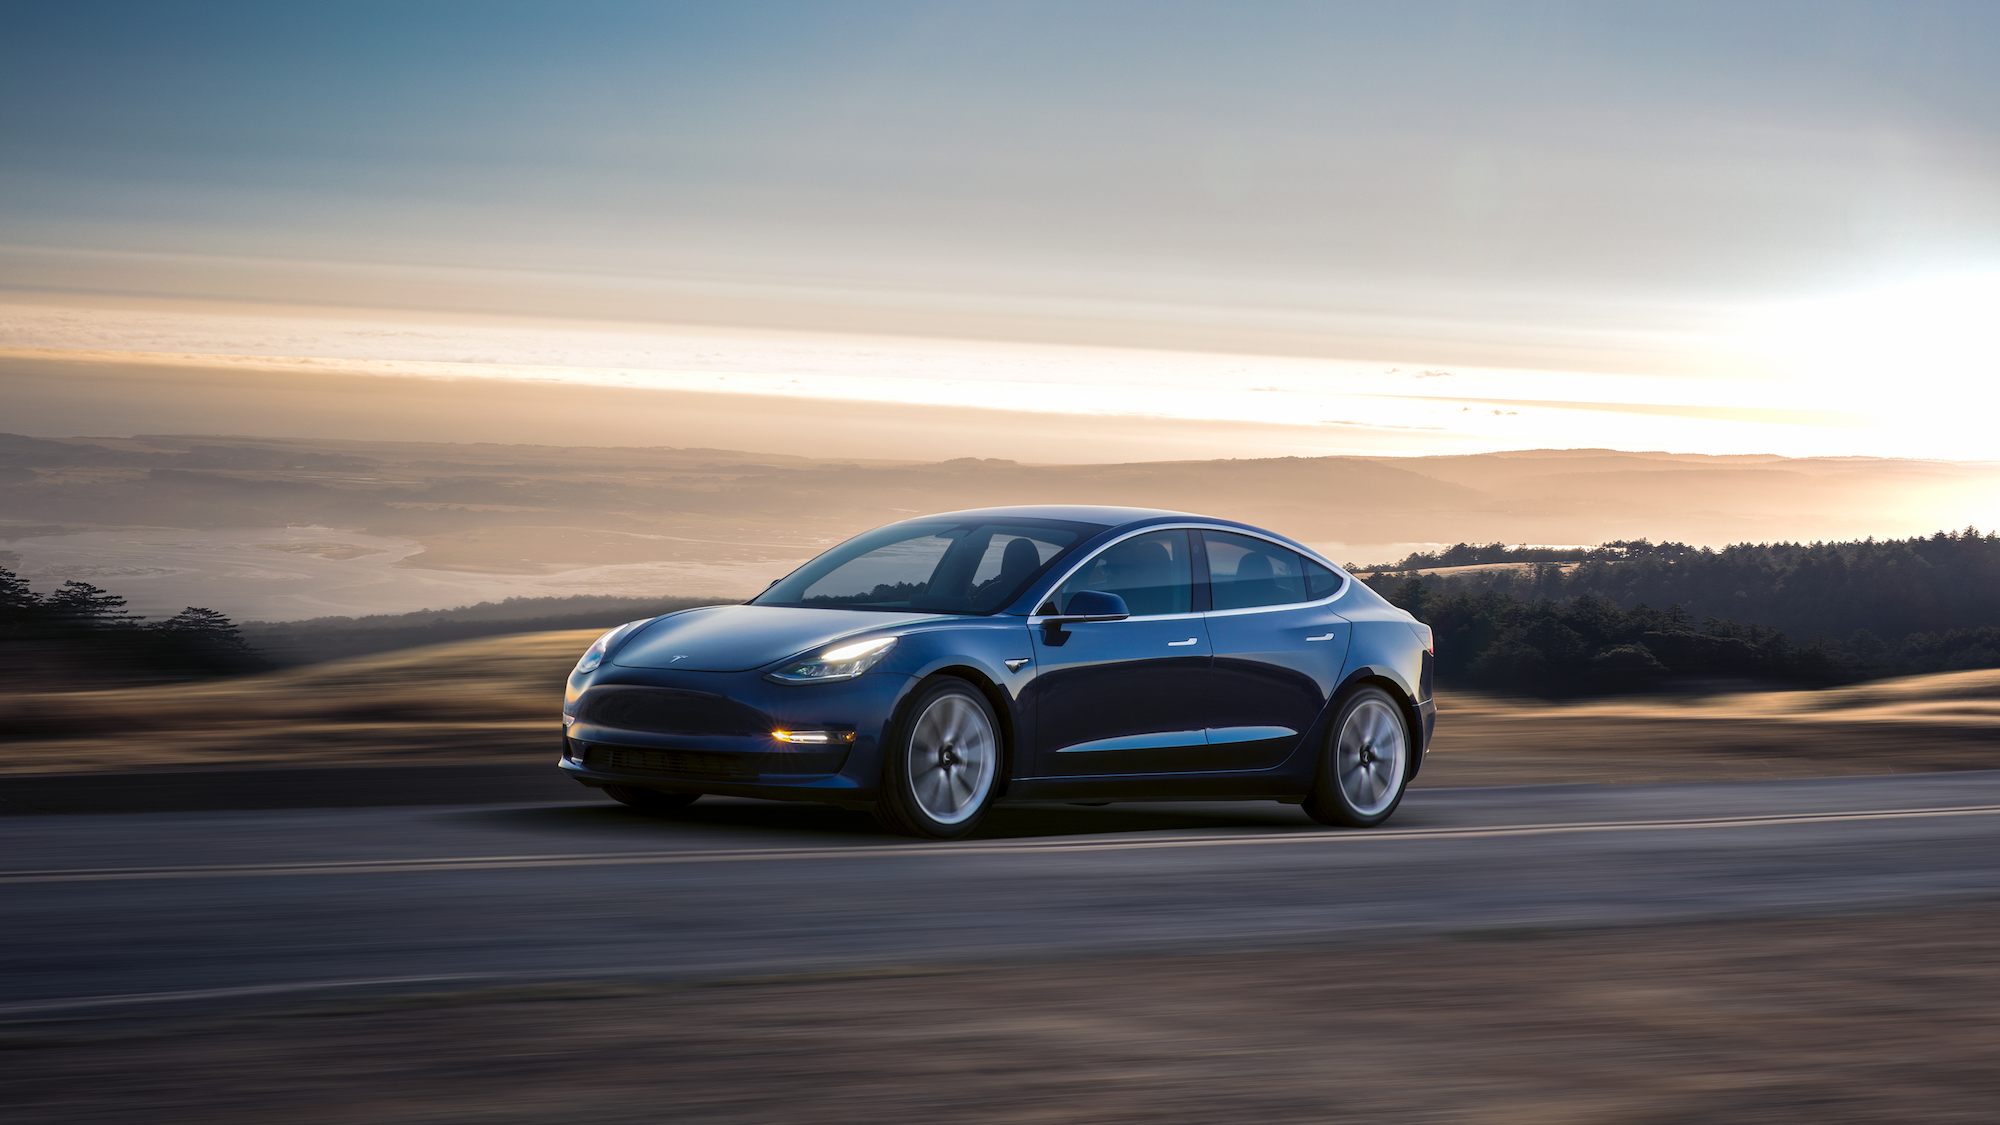 Tesla’s Model 3 is coming to some of its East Coast showrooms